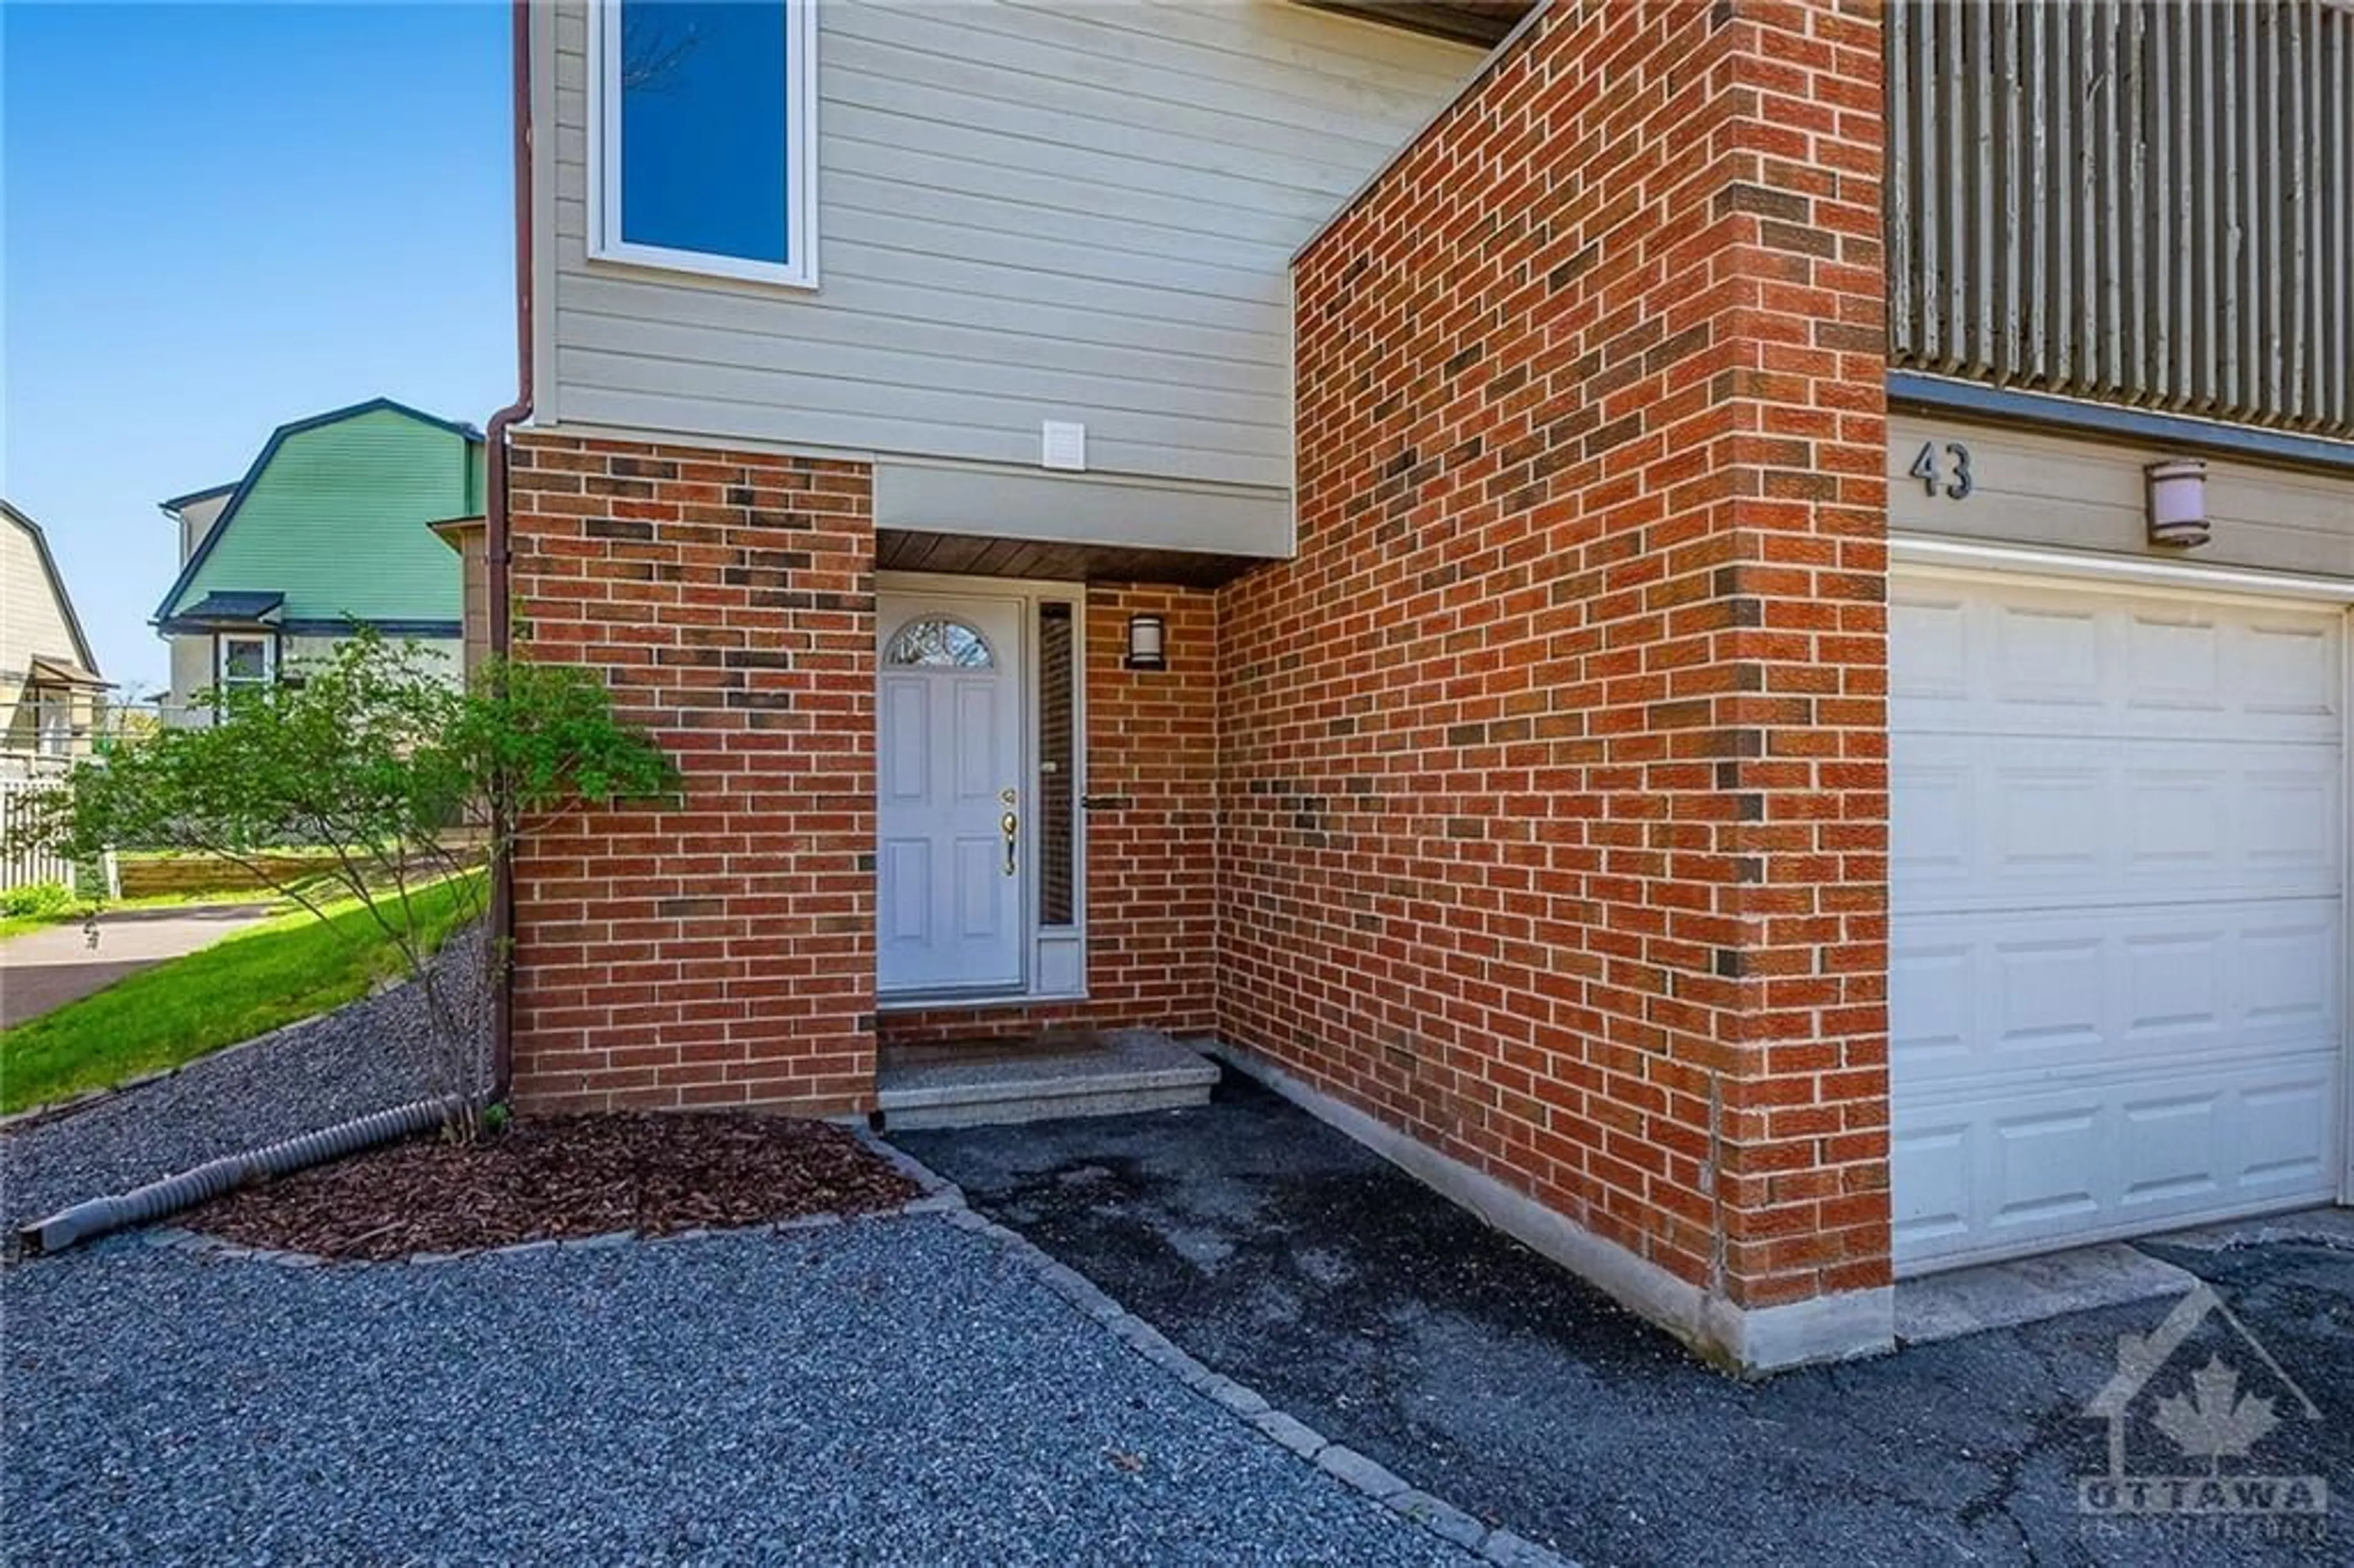 Home with brick exterior material for 3205 UPLANDS Dr #43, Ottawa Ontario K1V 9T3